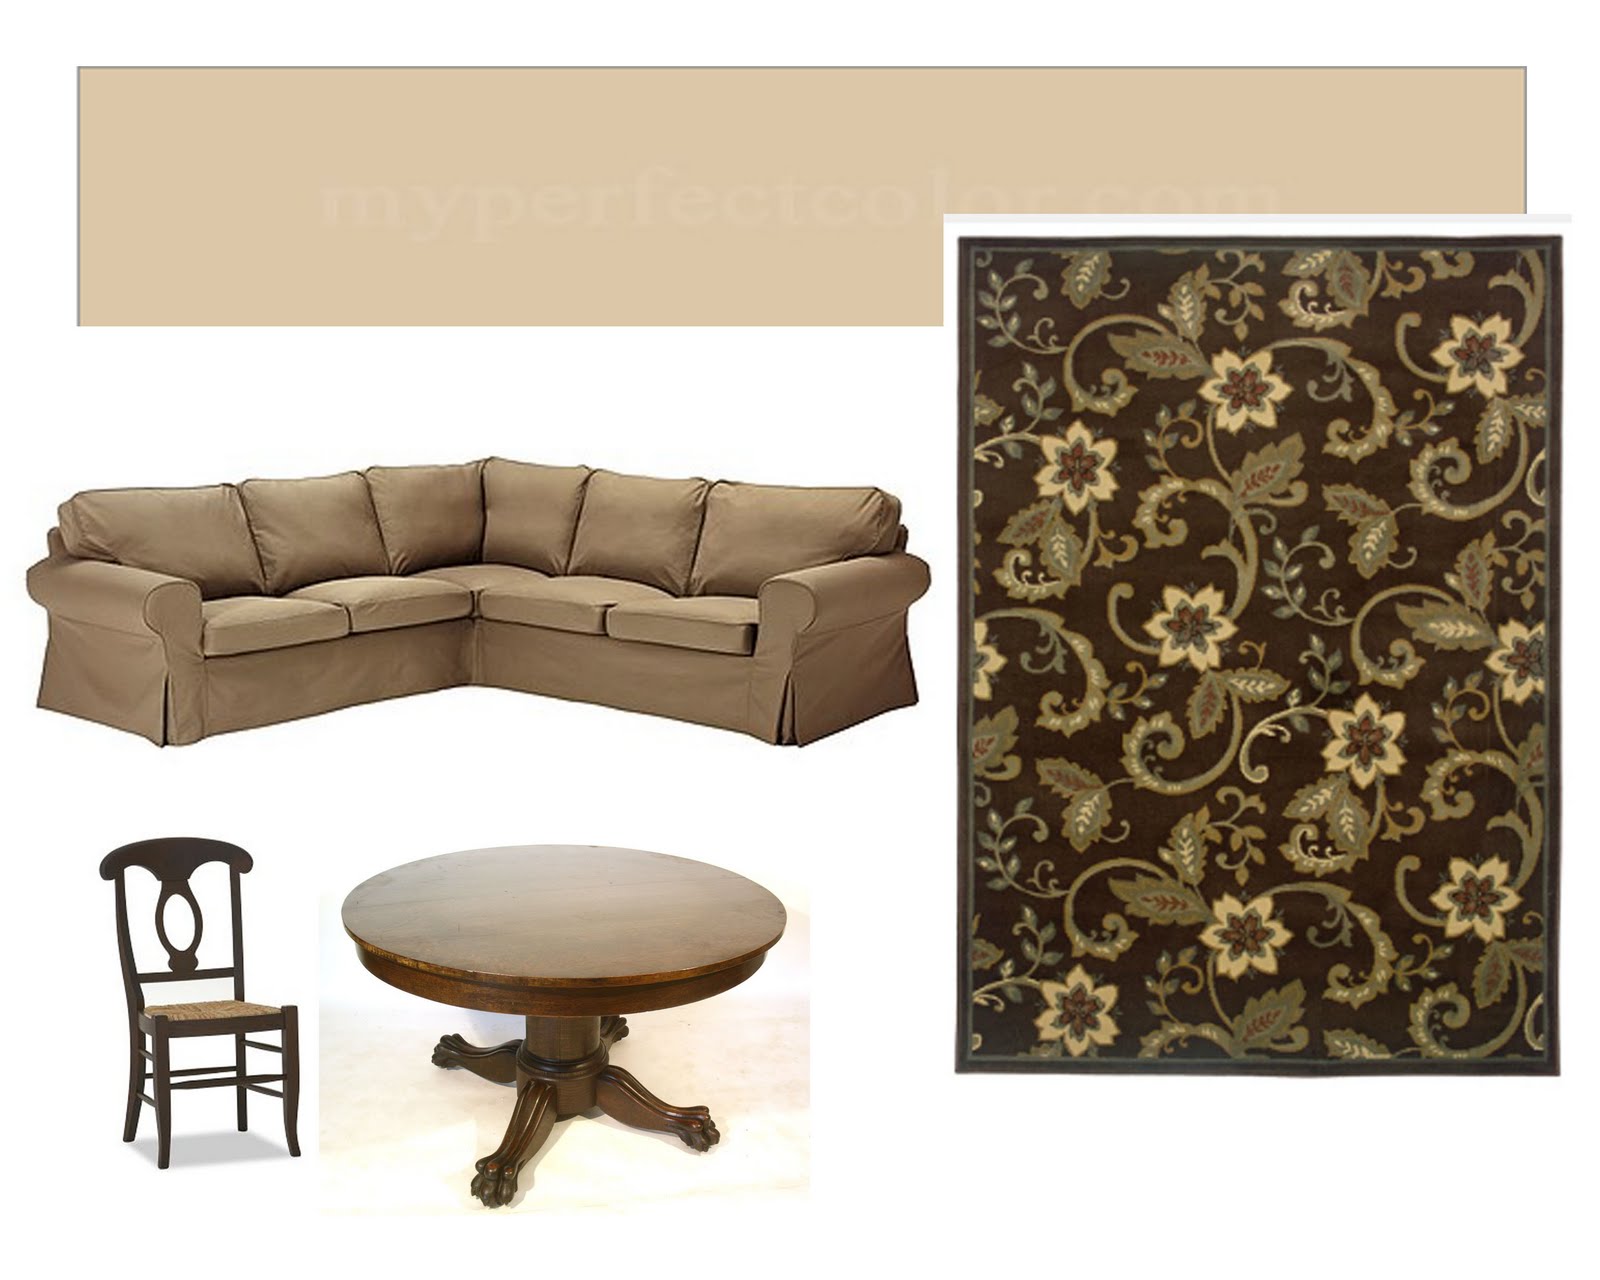  moodboard of the other large elements in our living and dining rooms title=